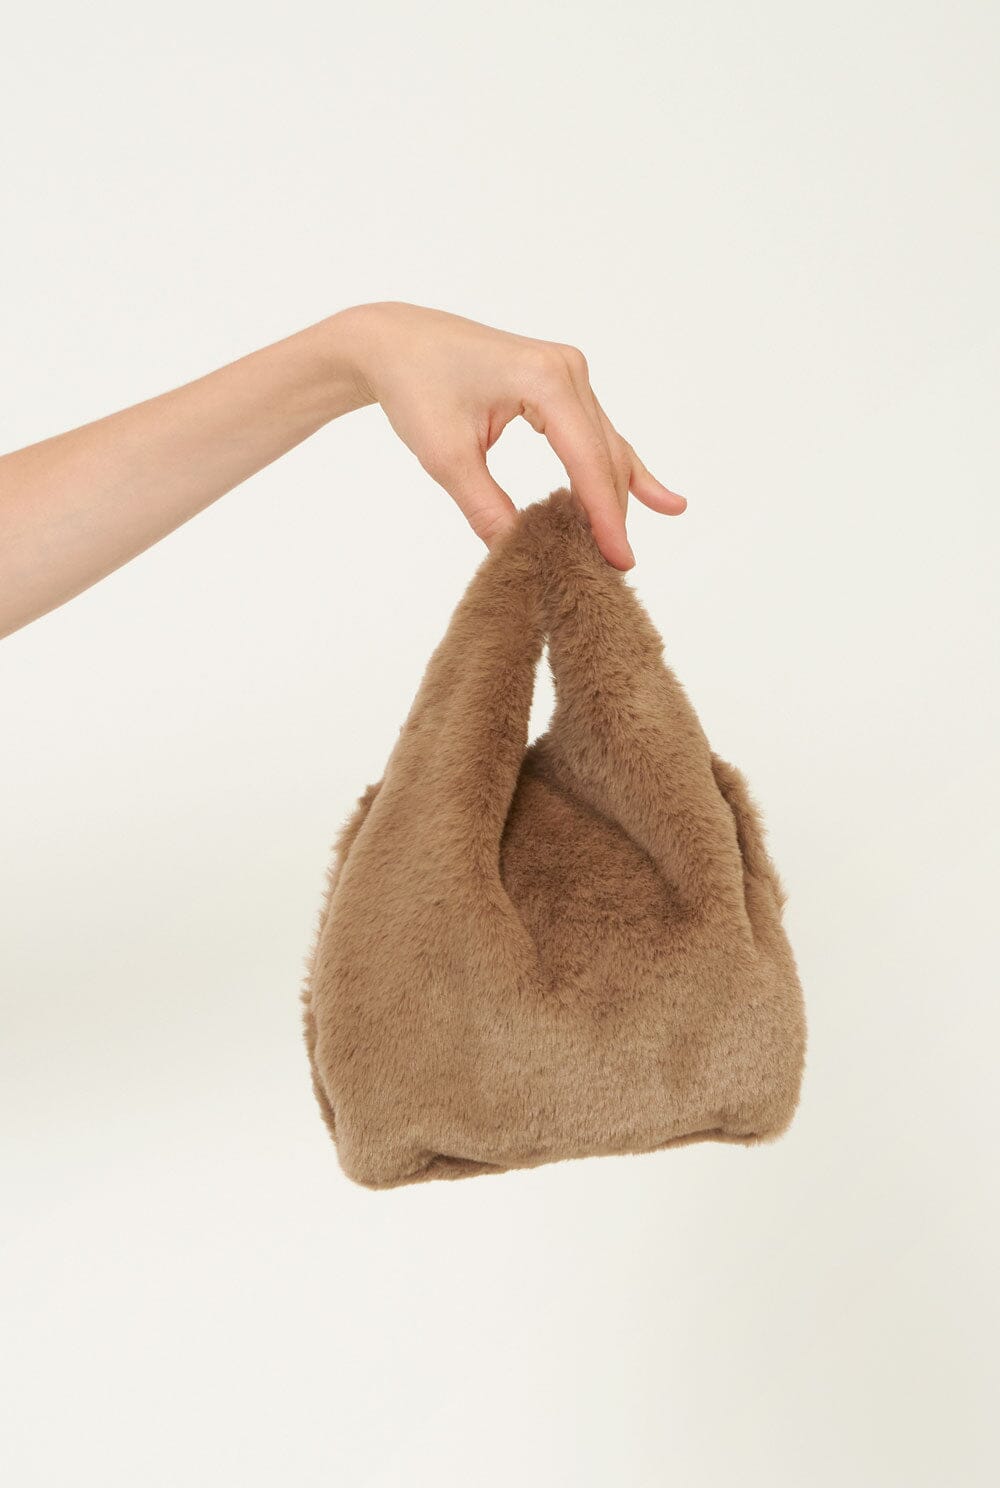 The Baby Julia Bag SORA Collection - Color BEIGE Hand bags The Bag Lab 